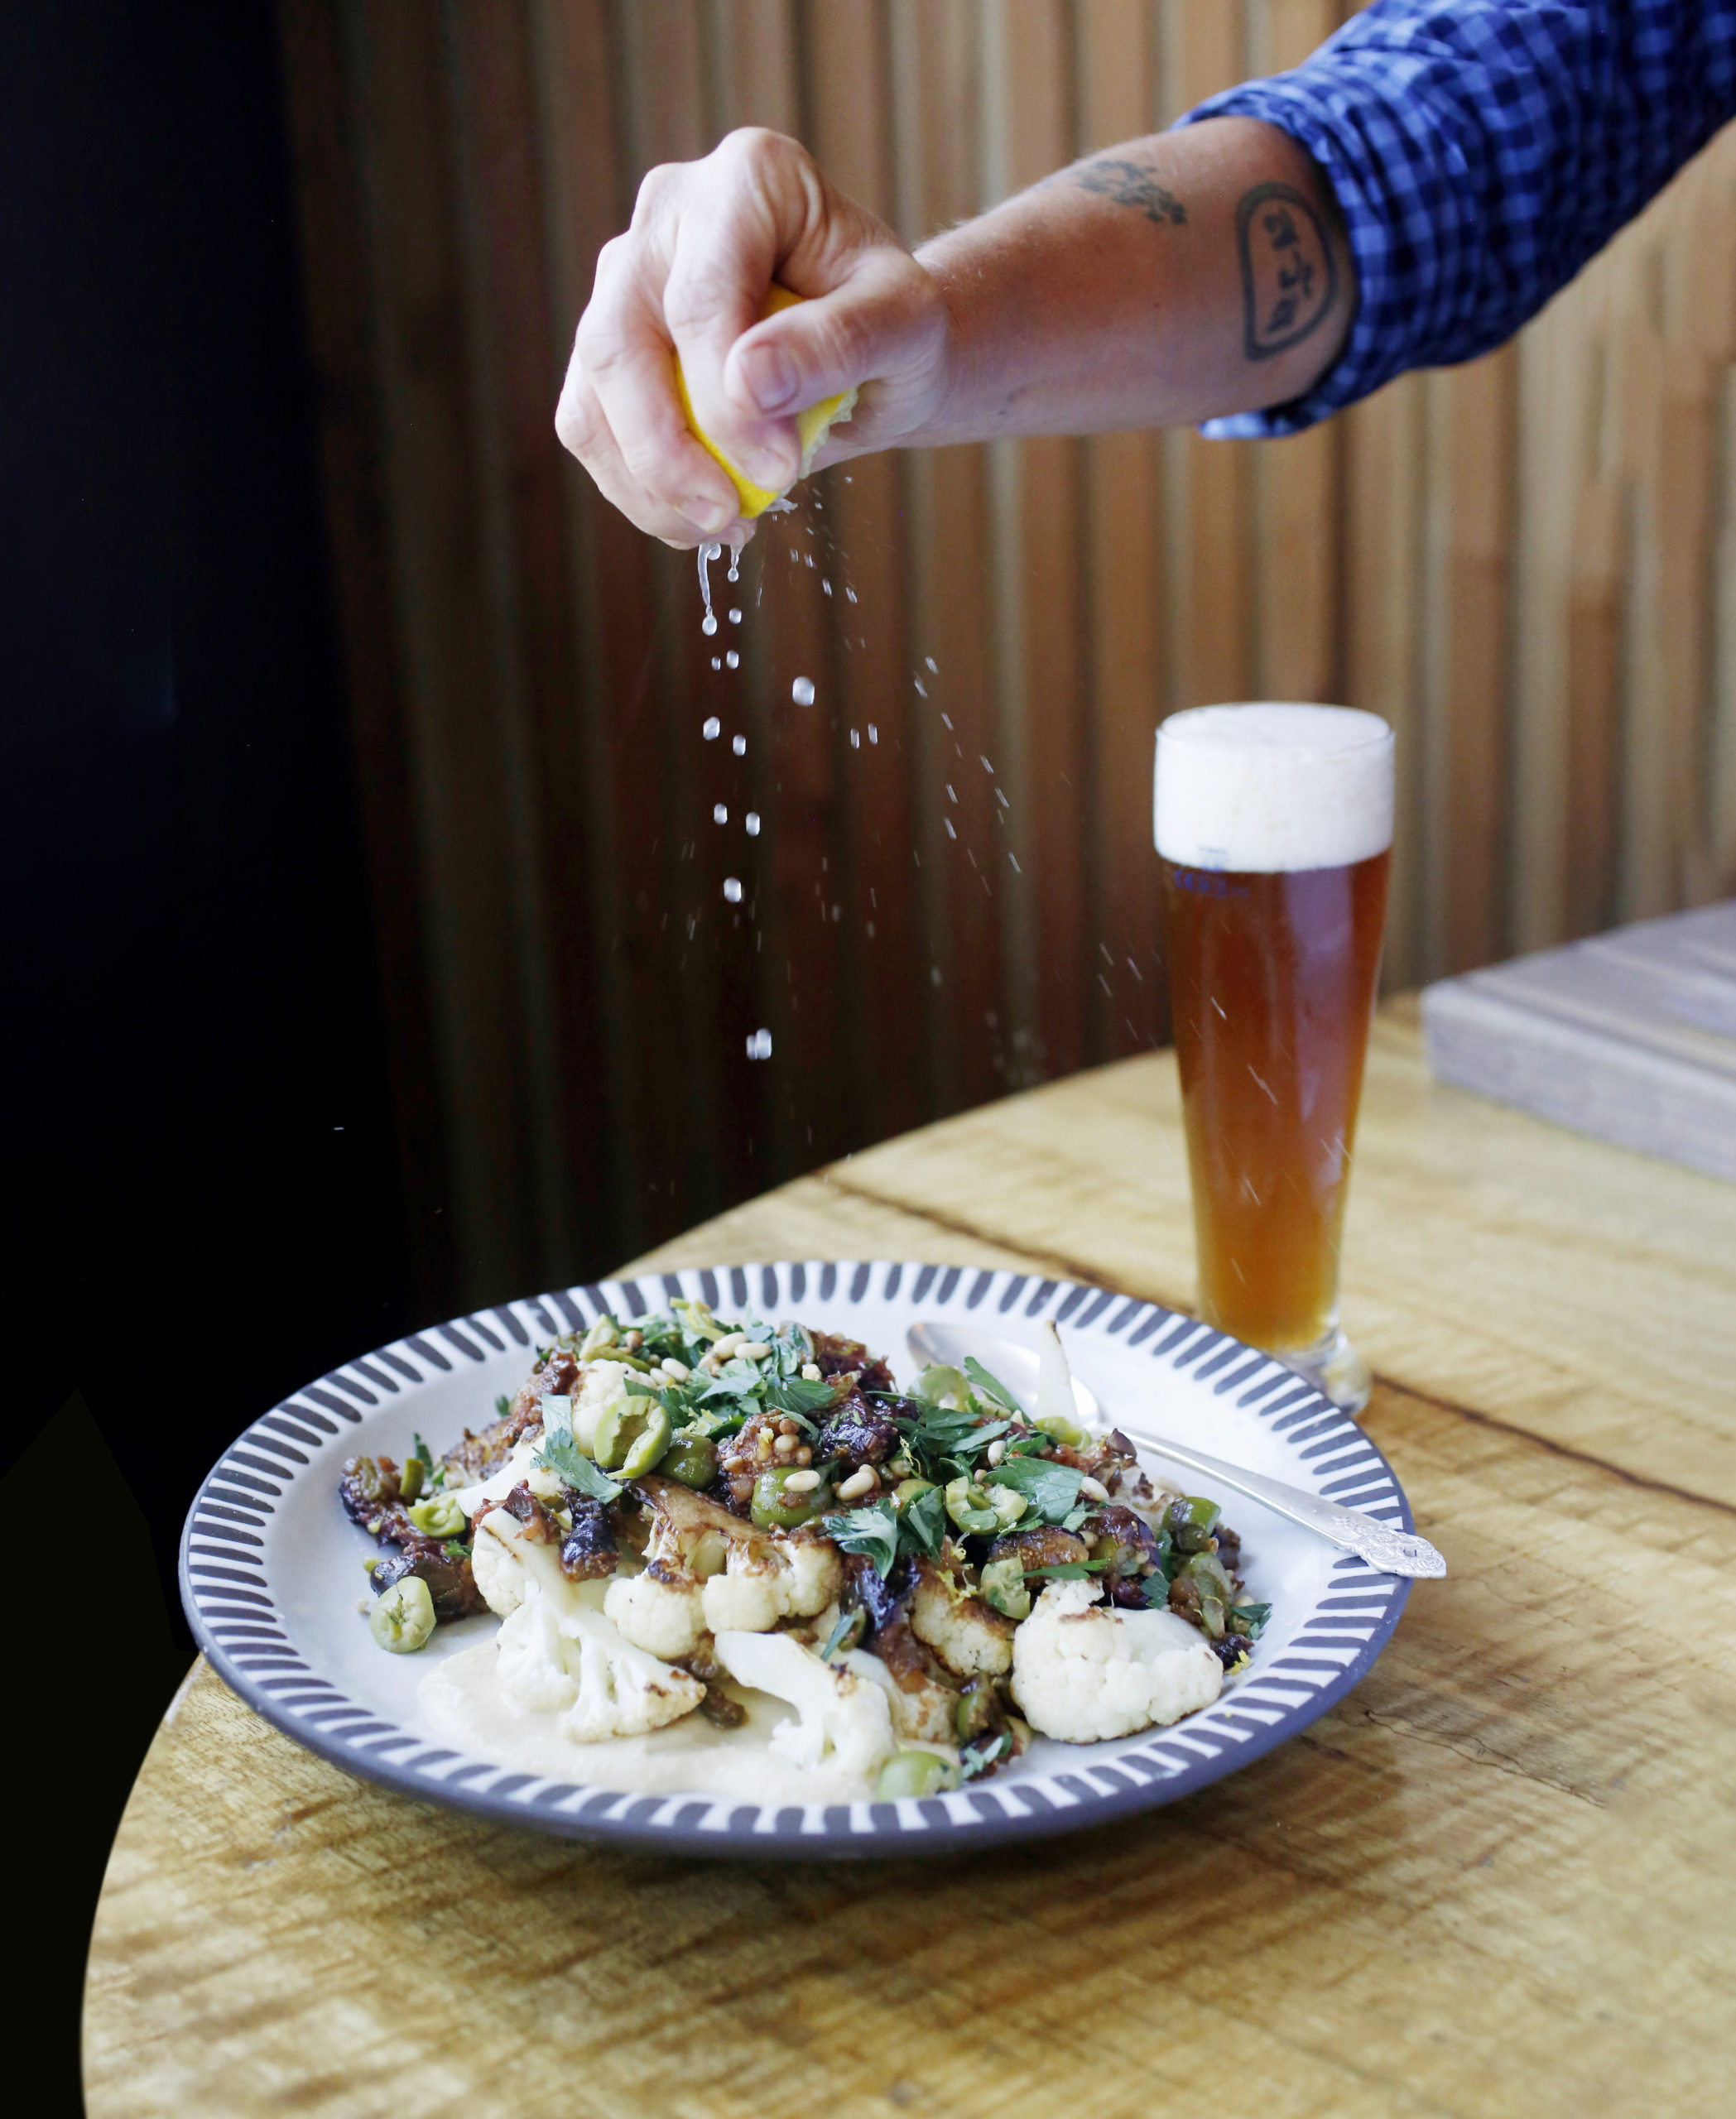 Chef Crista Luedtke squeezes a lemon on a plate of roasted cauliflower, pureed chickpeas, and topped with roasted figs, chopped green olives, pine nuts, and parsley at her restaurant Brot in Guerneville, Calif., on Wednesday, July 7, 2021.(Beth Schlanker/The Press Democrat)